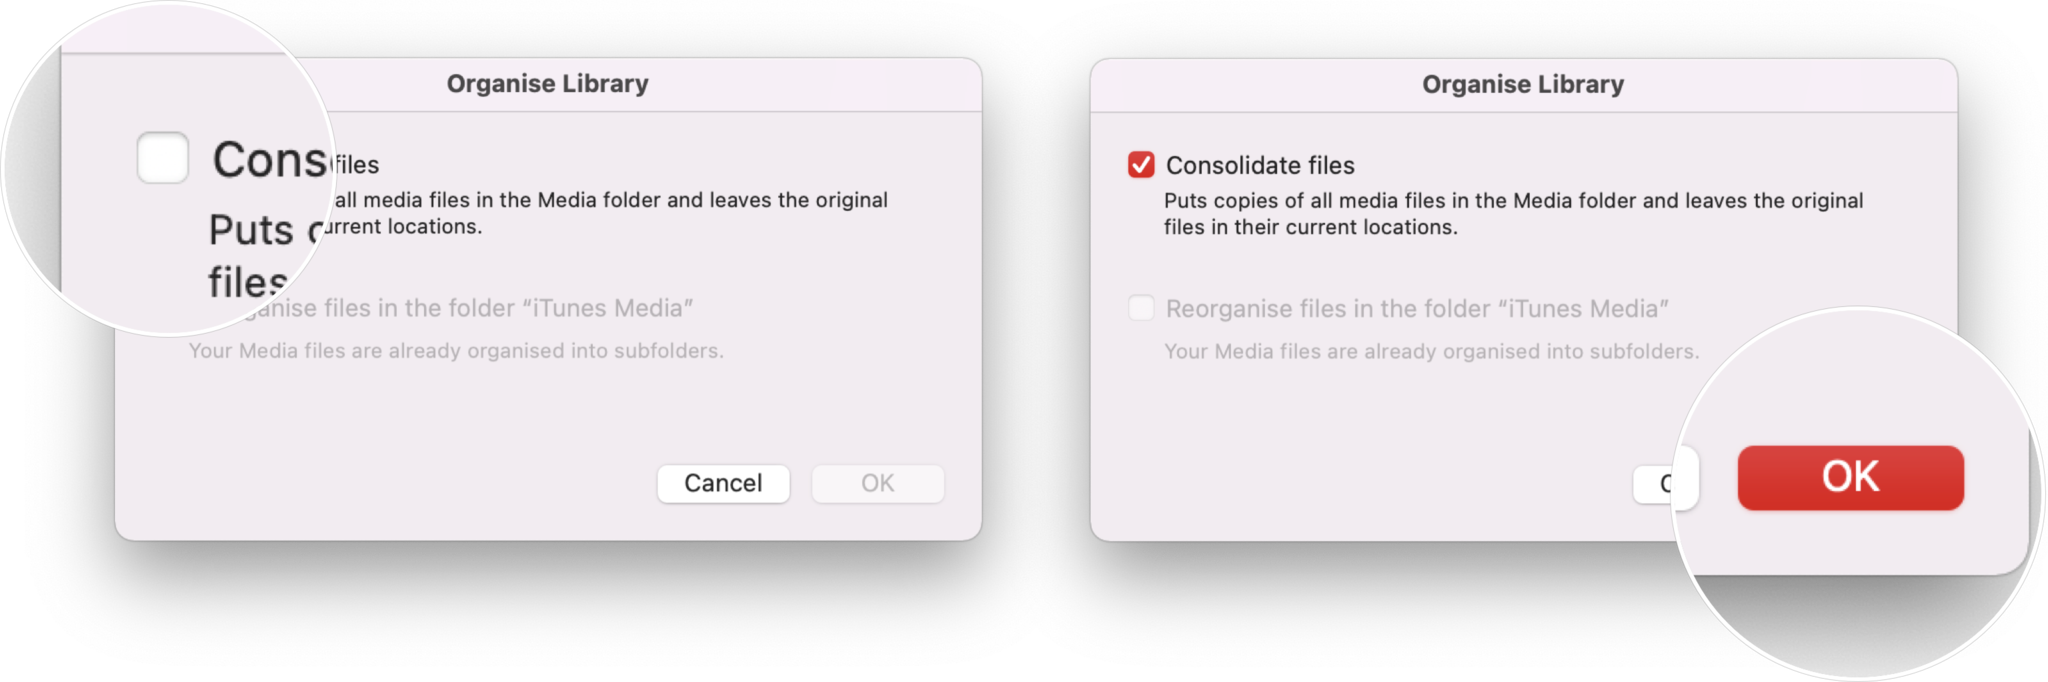 Consolidate your music library by showing: Check the box for Consolidate Files, click OK